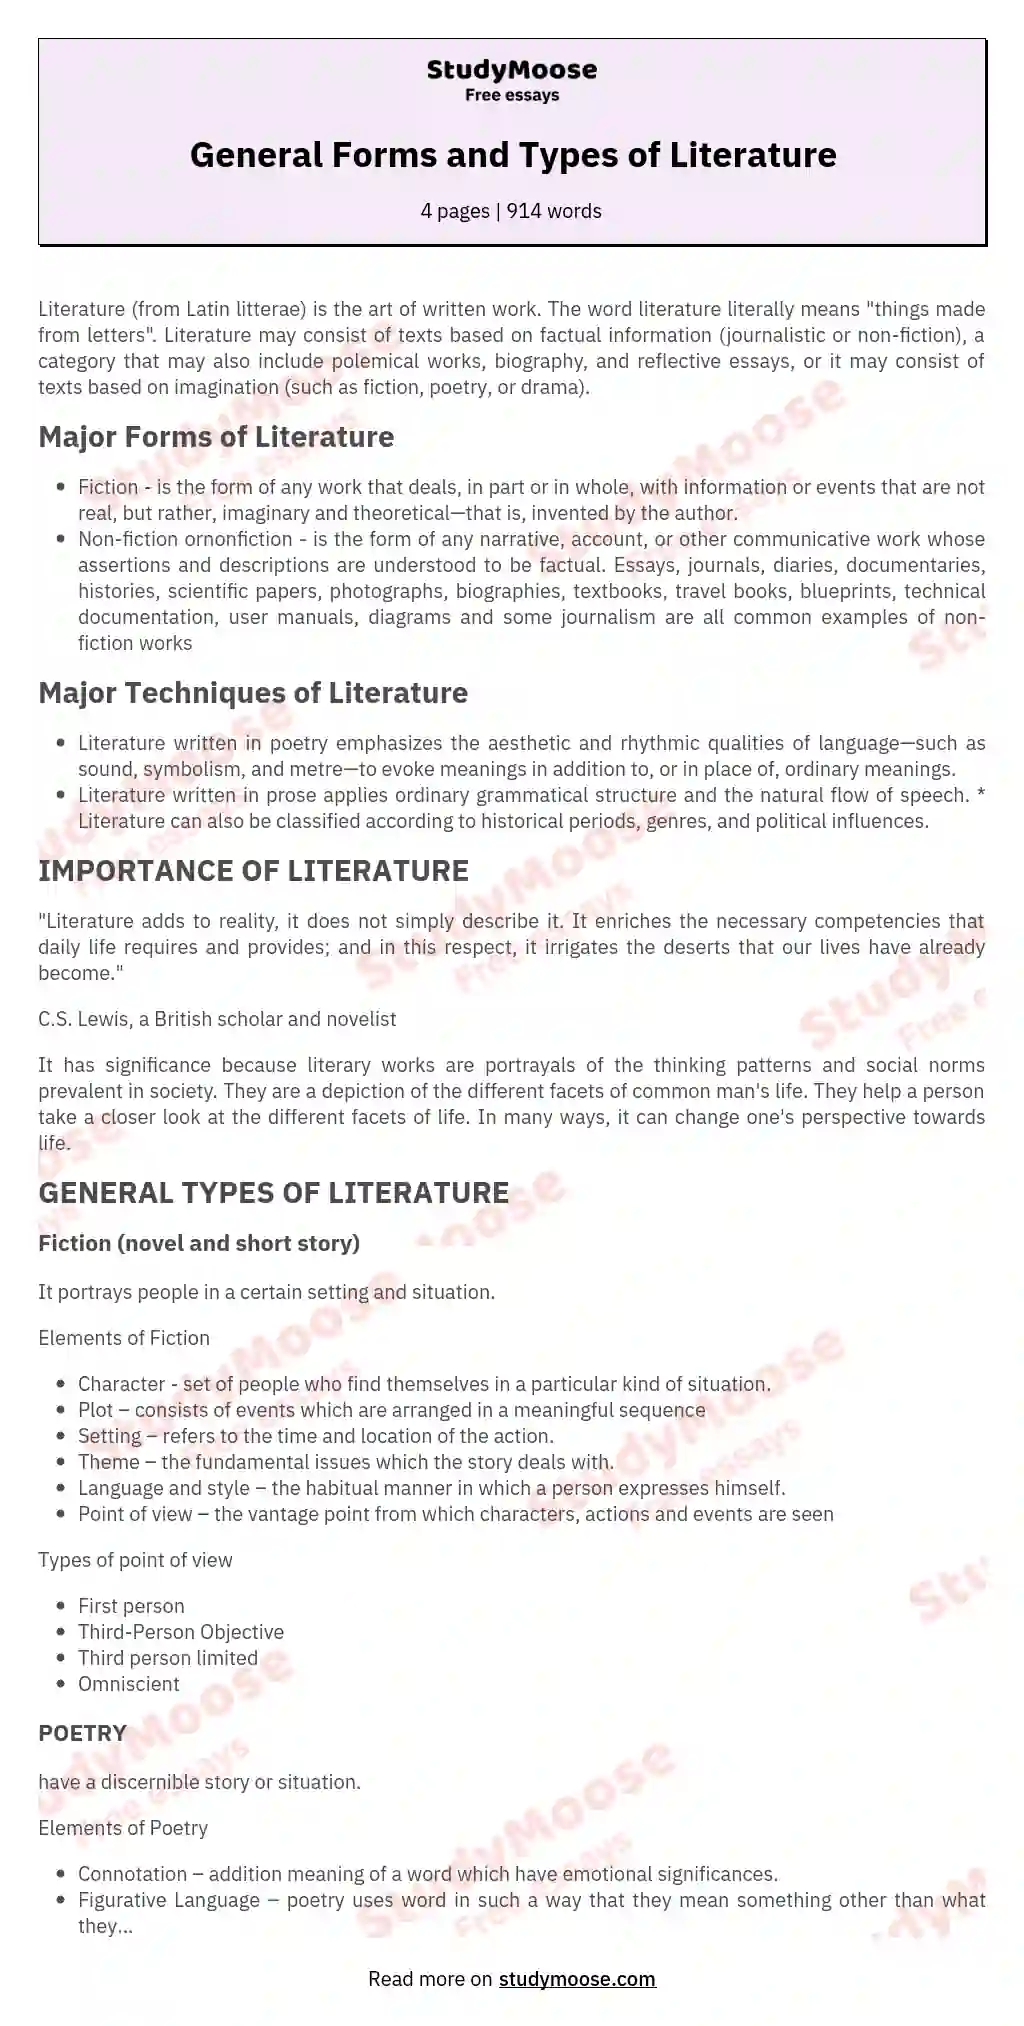 General Forms and Types of Literature essay